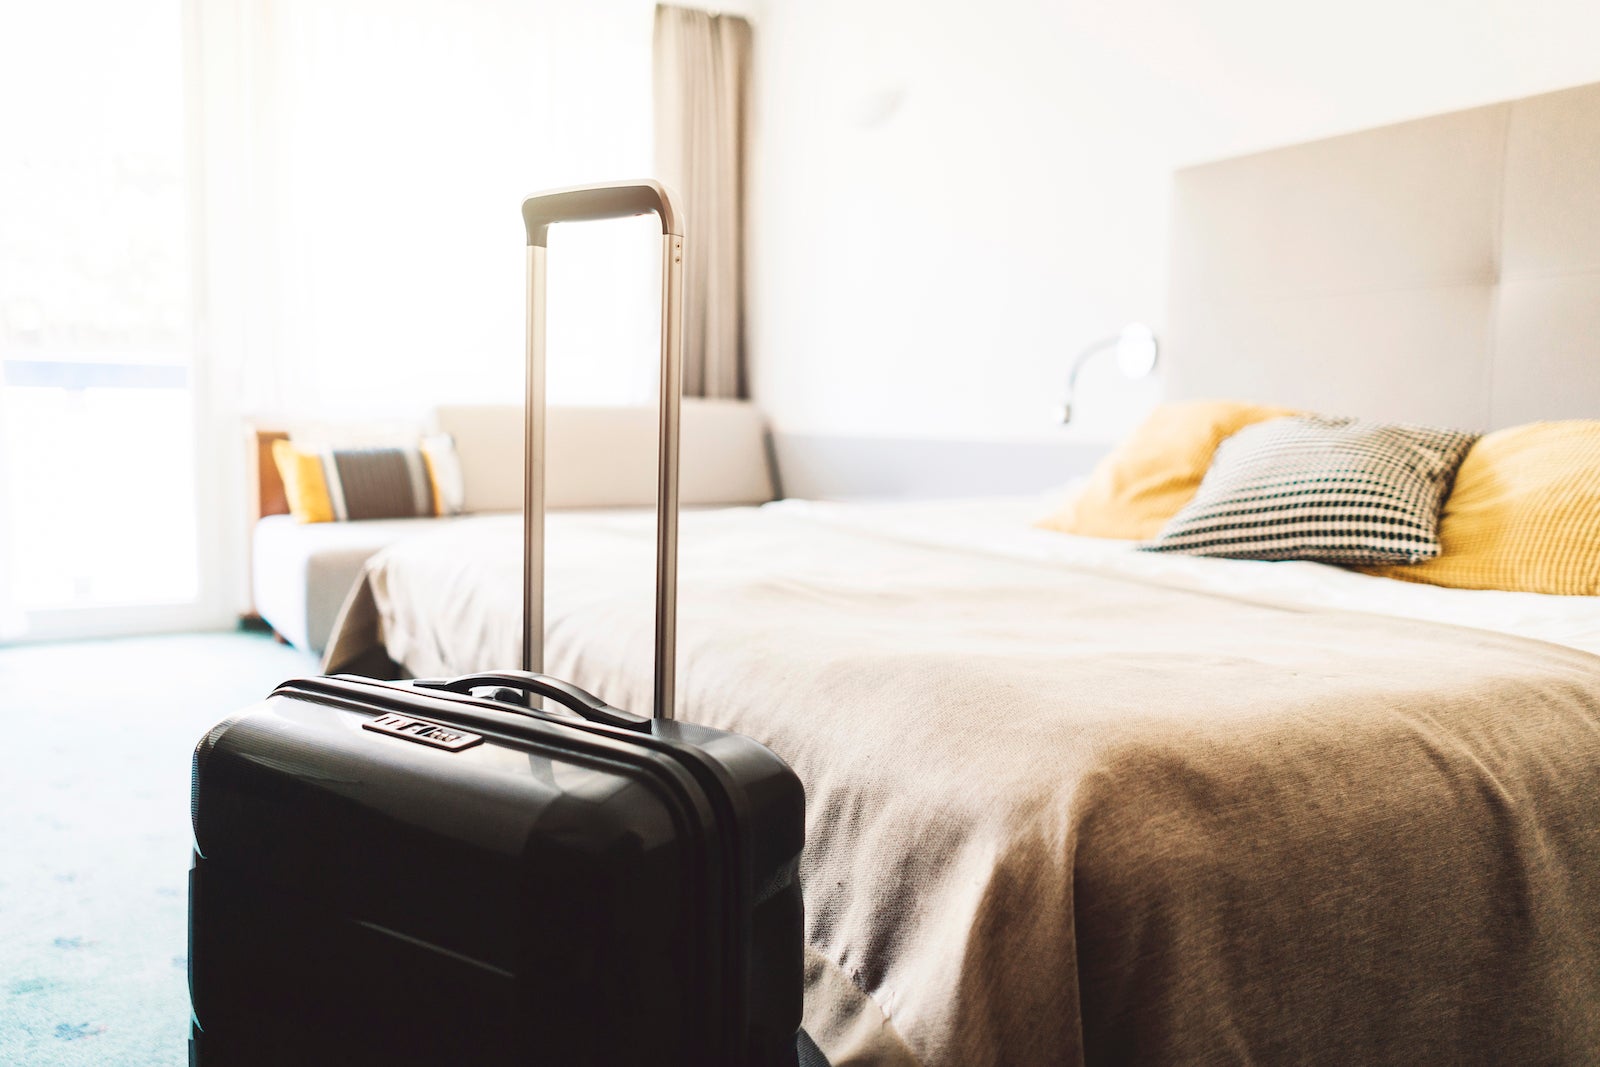 a suitcase in a hotel room